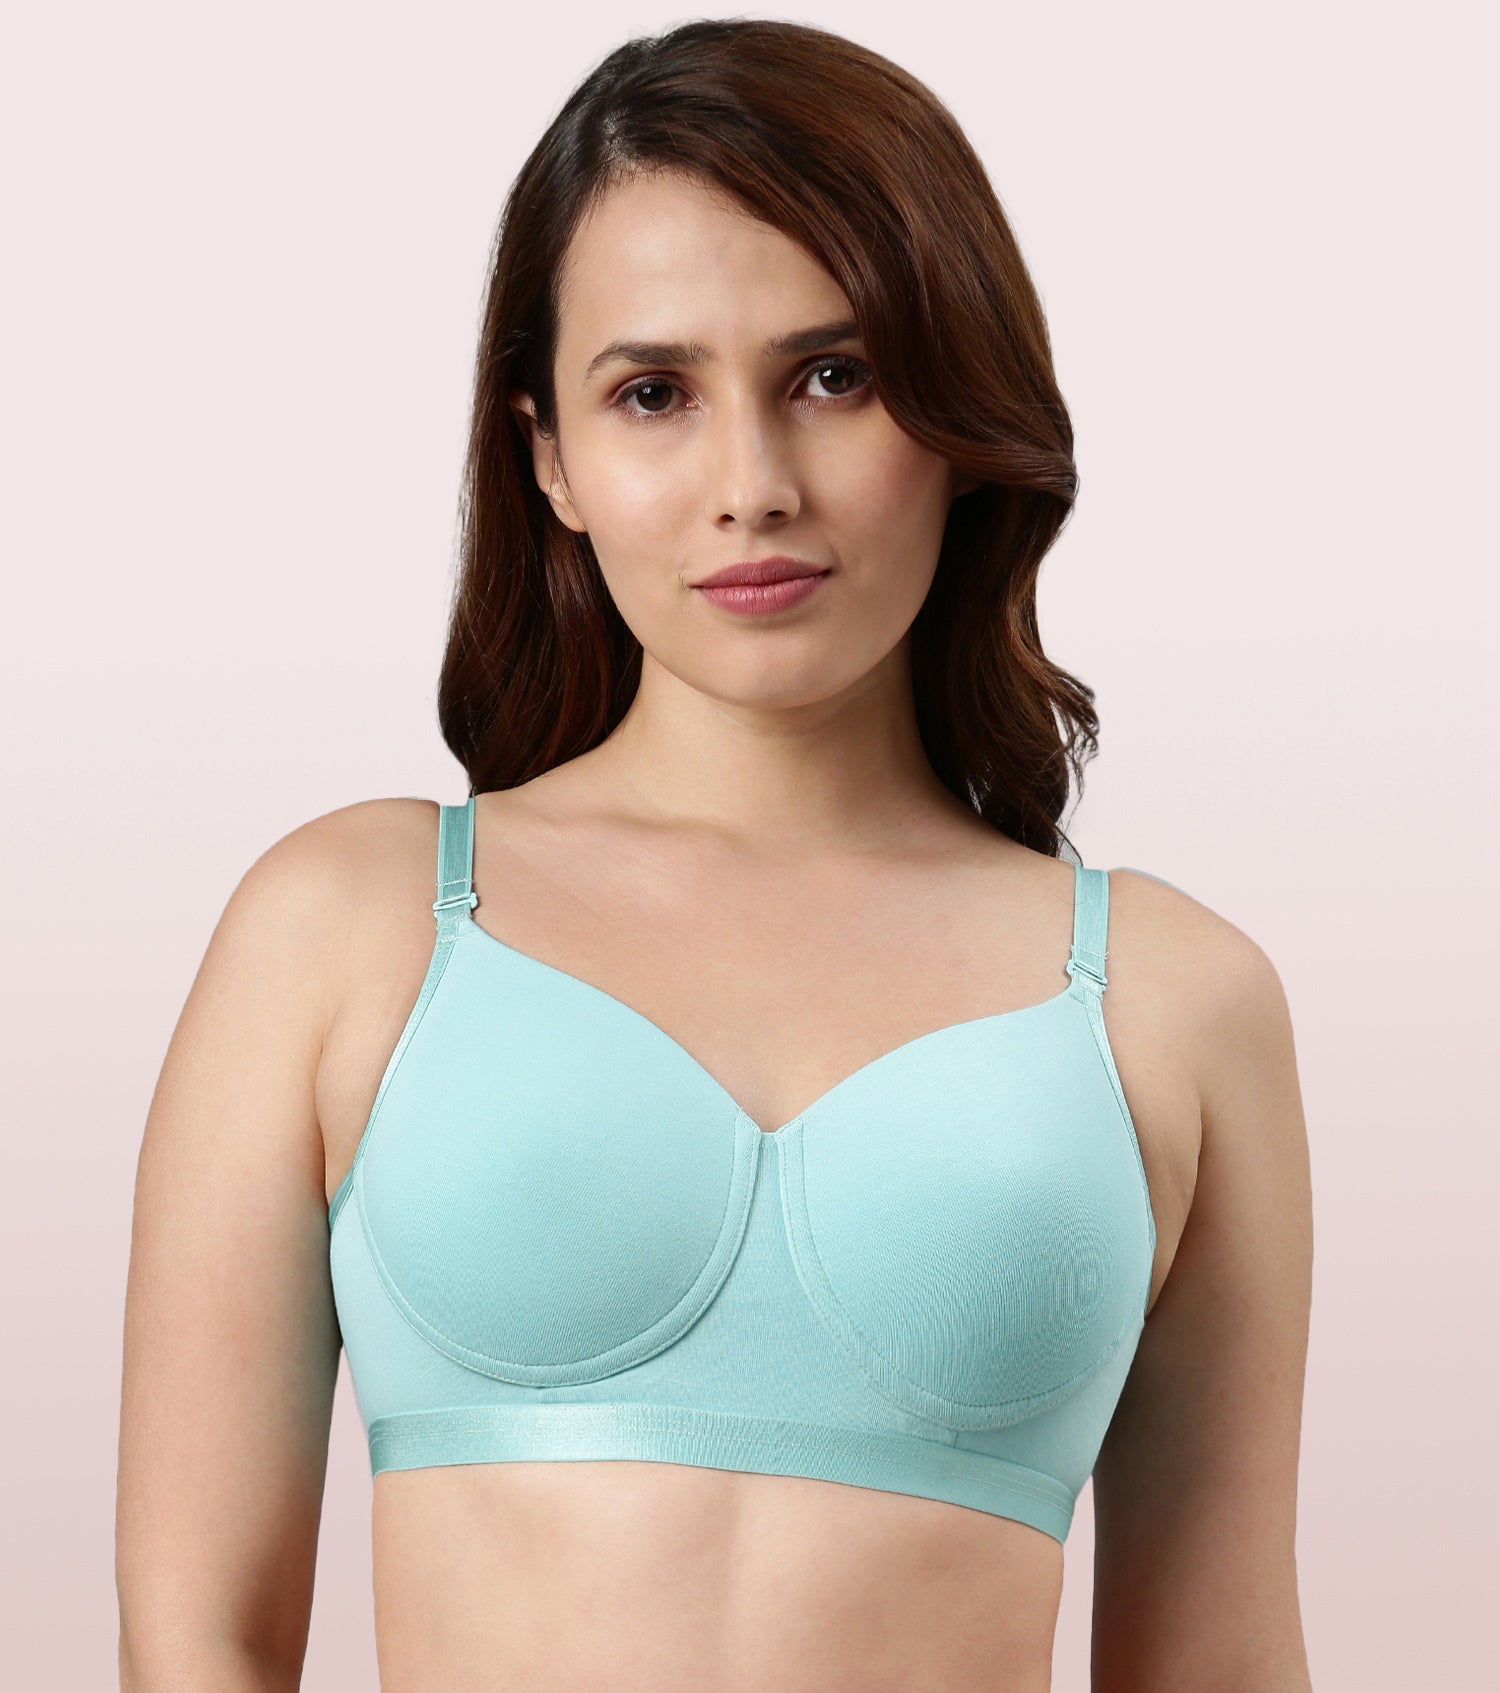 Enamor F089 Classic Plunge Lace T-Shirt Bra Padded Wirefree Medium Coverage  Peacock in Pune at best price by Lawanyam - Justdial